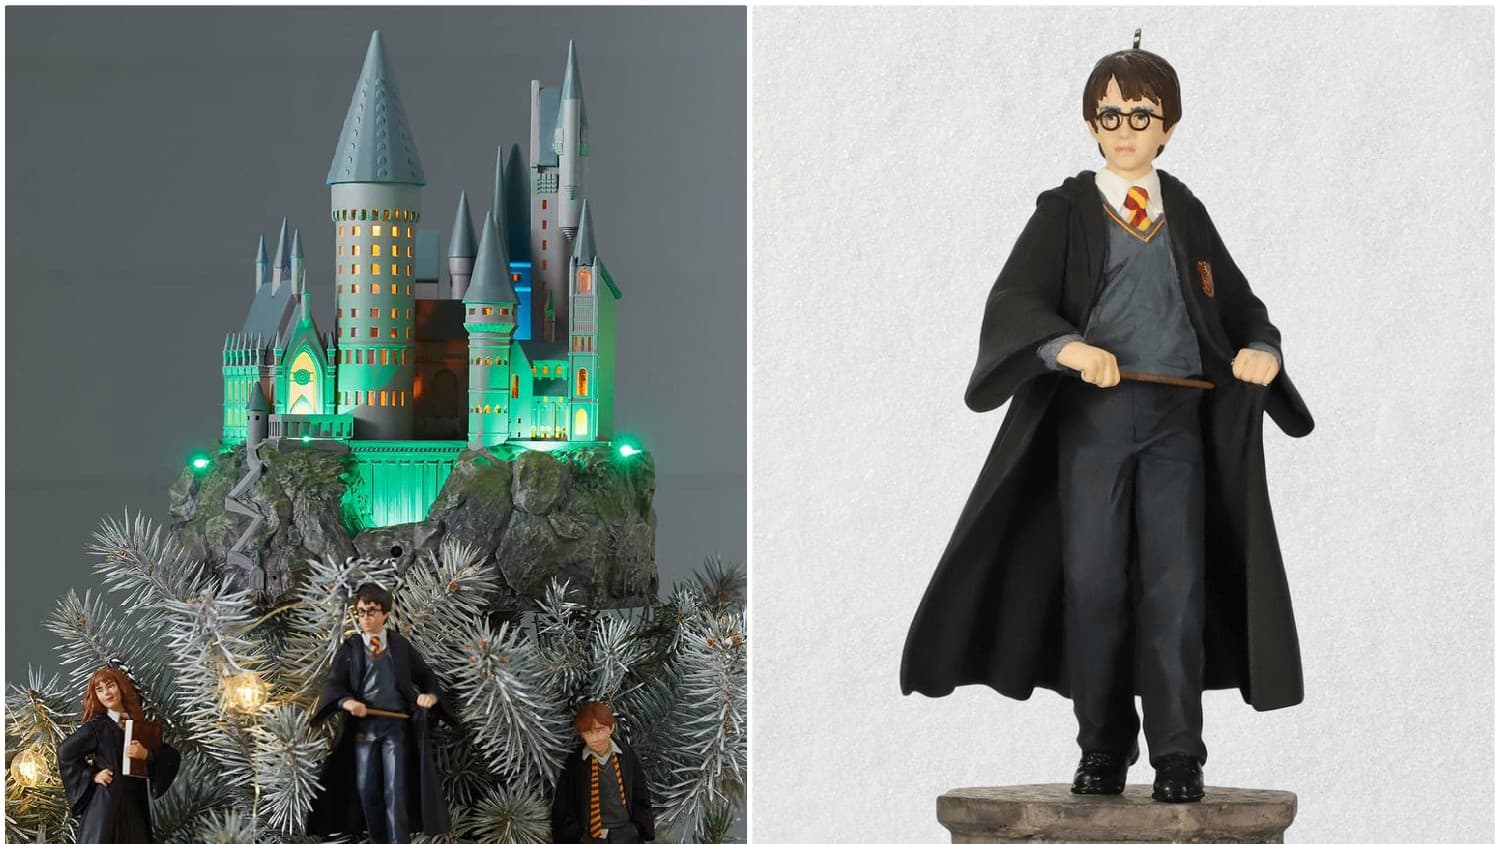 Hallmark Released These Adorable Harry Potter Ornaments for 2019